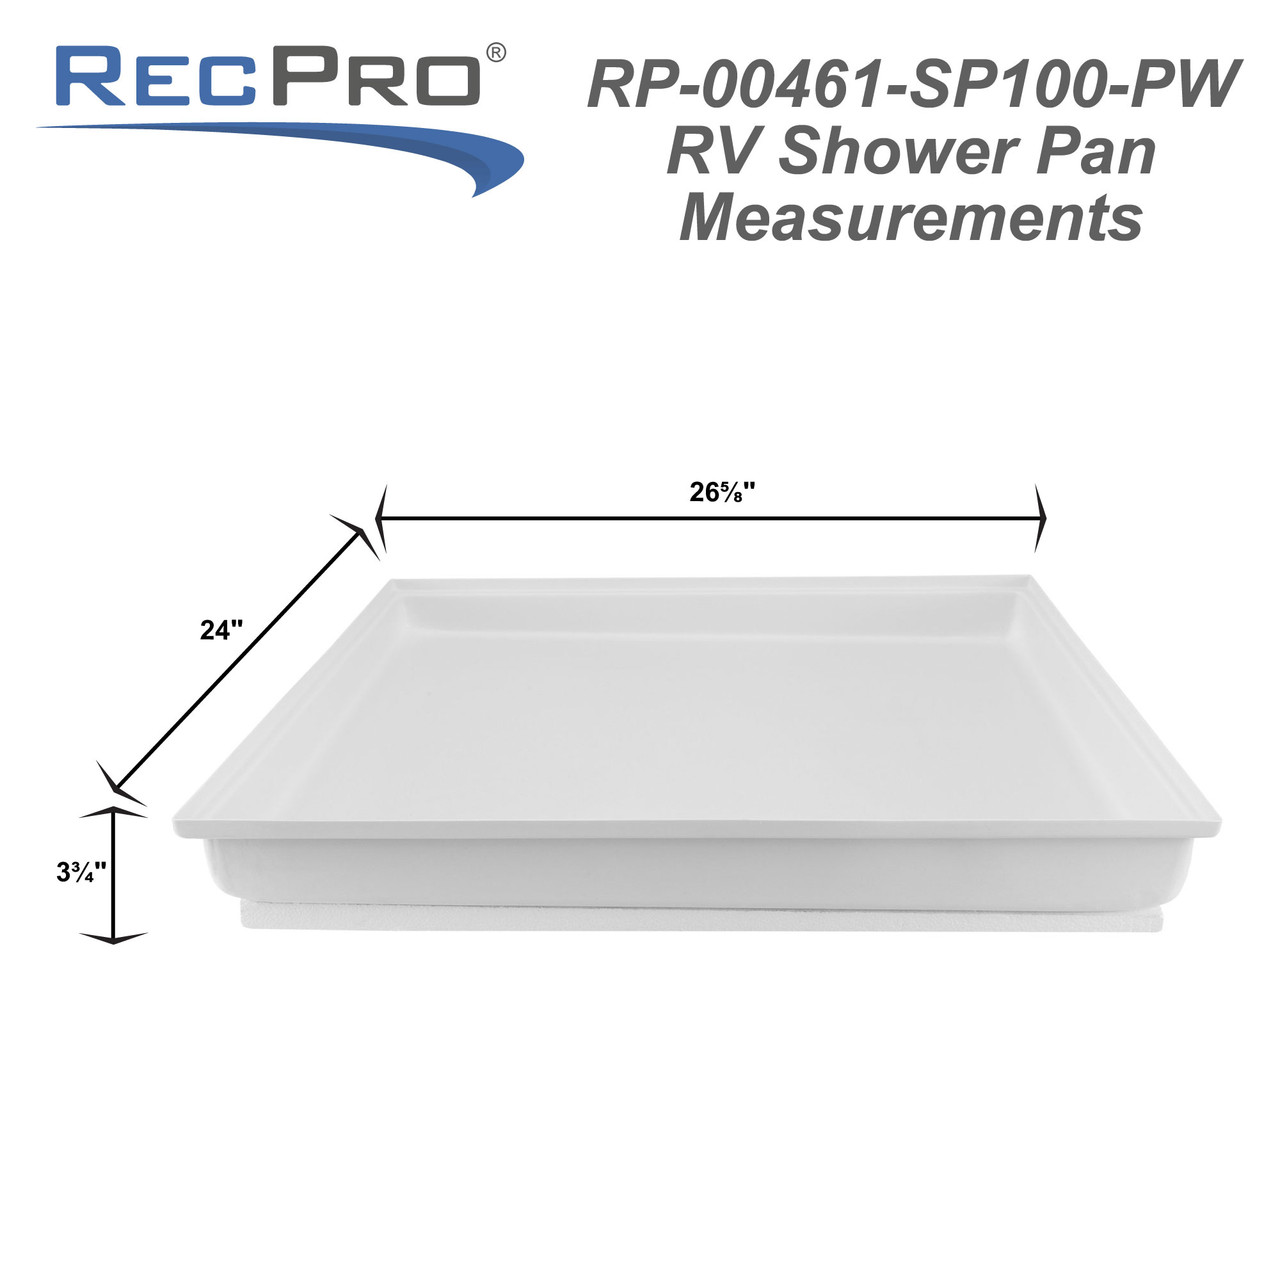 https://cdn11.bigcommerce.com/s-kwuh809851/images/stencil/1280x1280/products/3256/31276/RP-00461-SP100-PW-RV-Shower-Pan-Measurements__24574.1674160647.jpg?c=2&imbypass=on